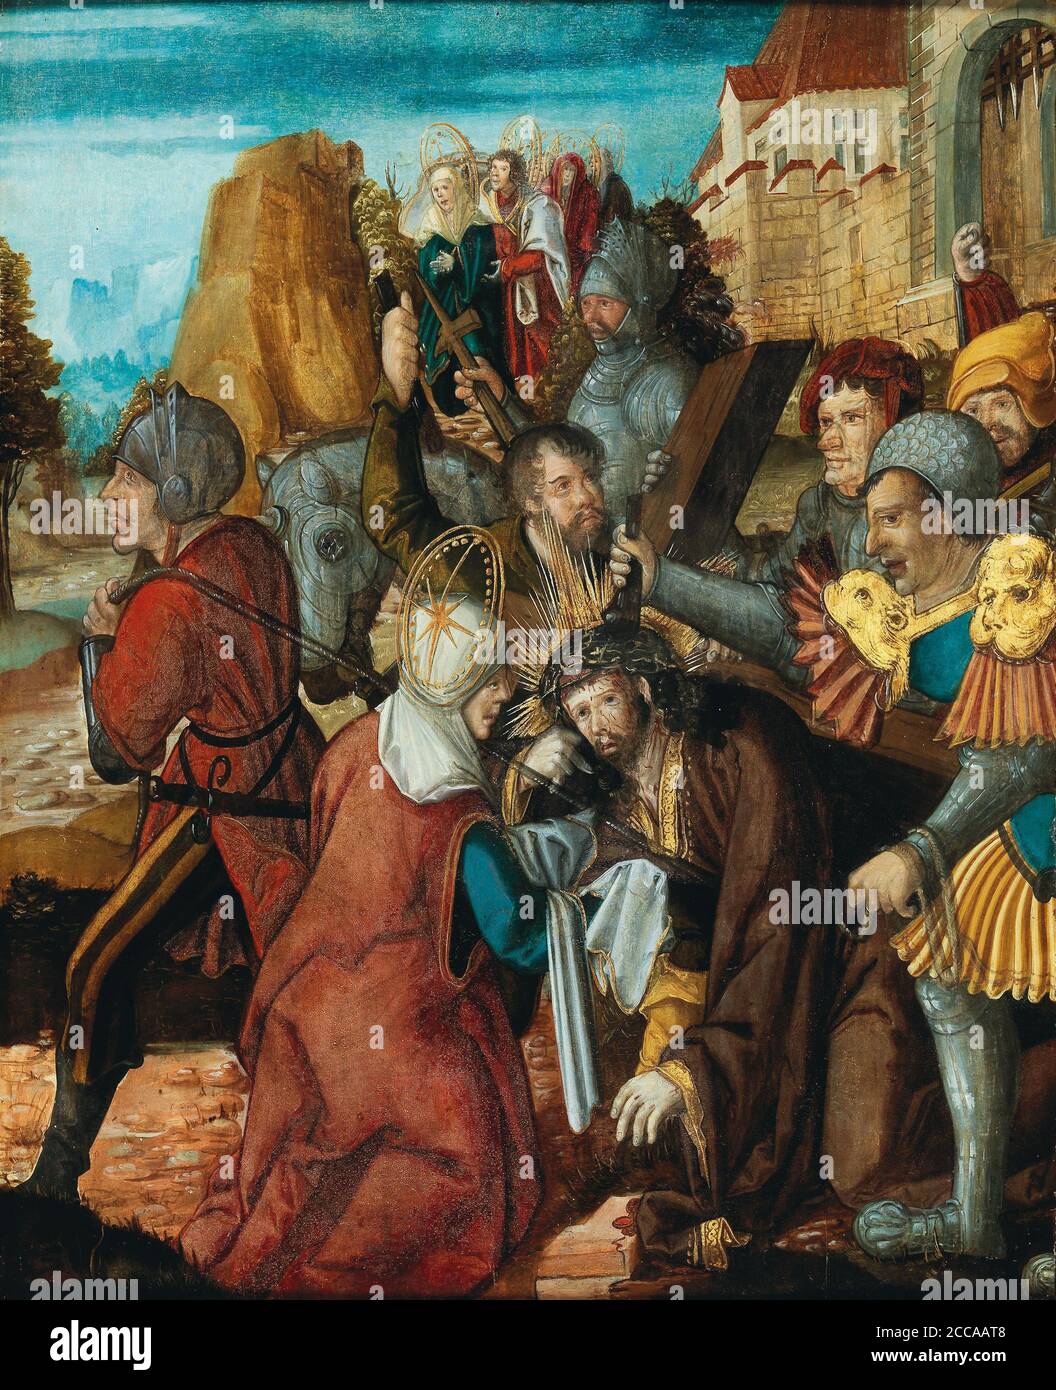 Saint Veronica presenting her veil to Christ on his way to Calvary. Museum: PRIVATE COLLECTION. Author: Southwest German master. Stock Photo